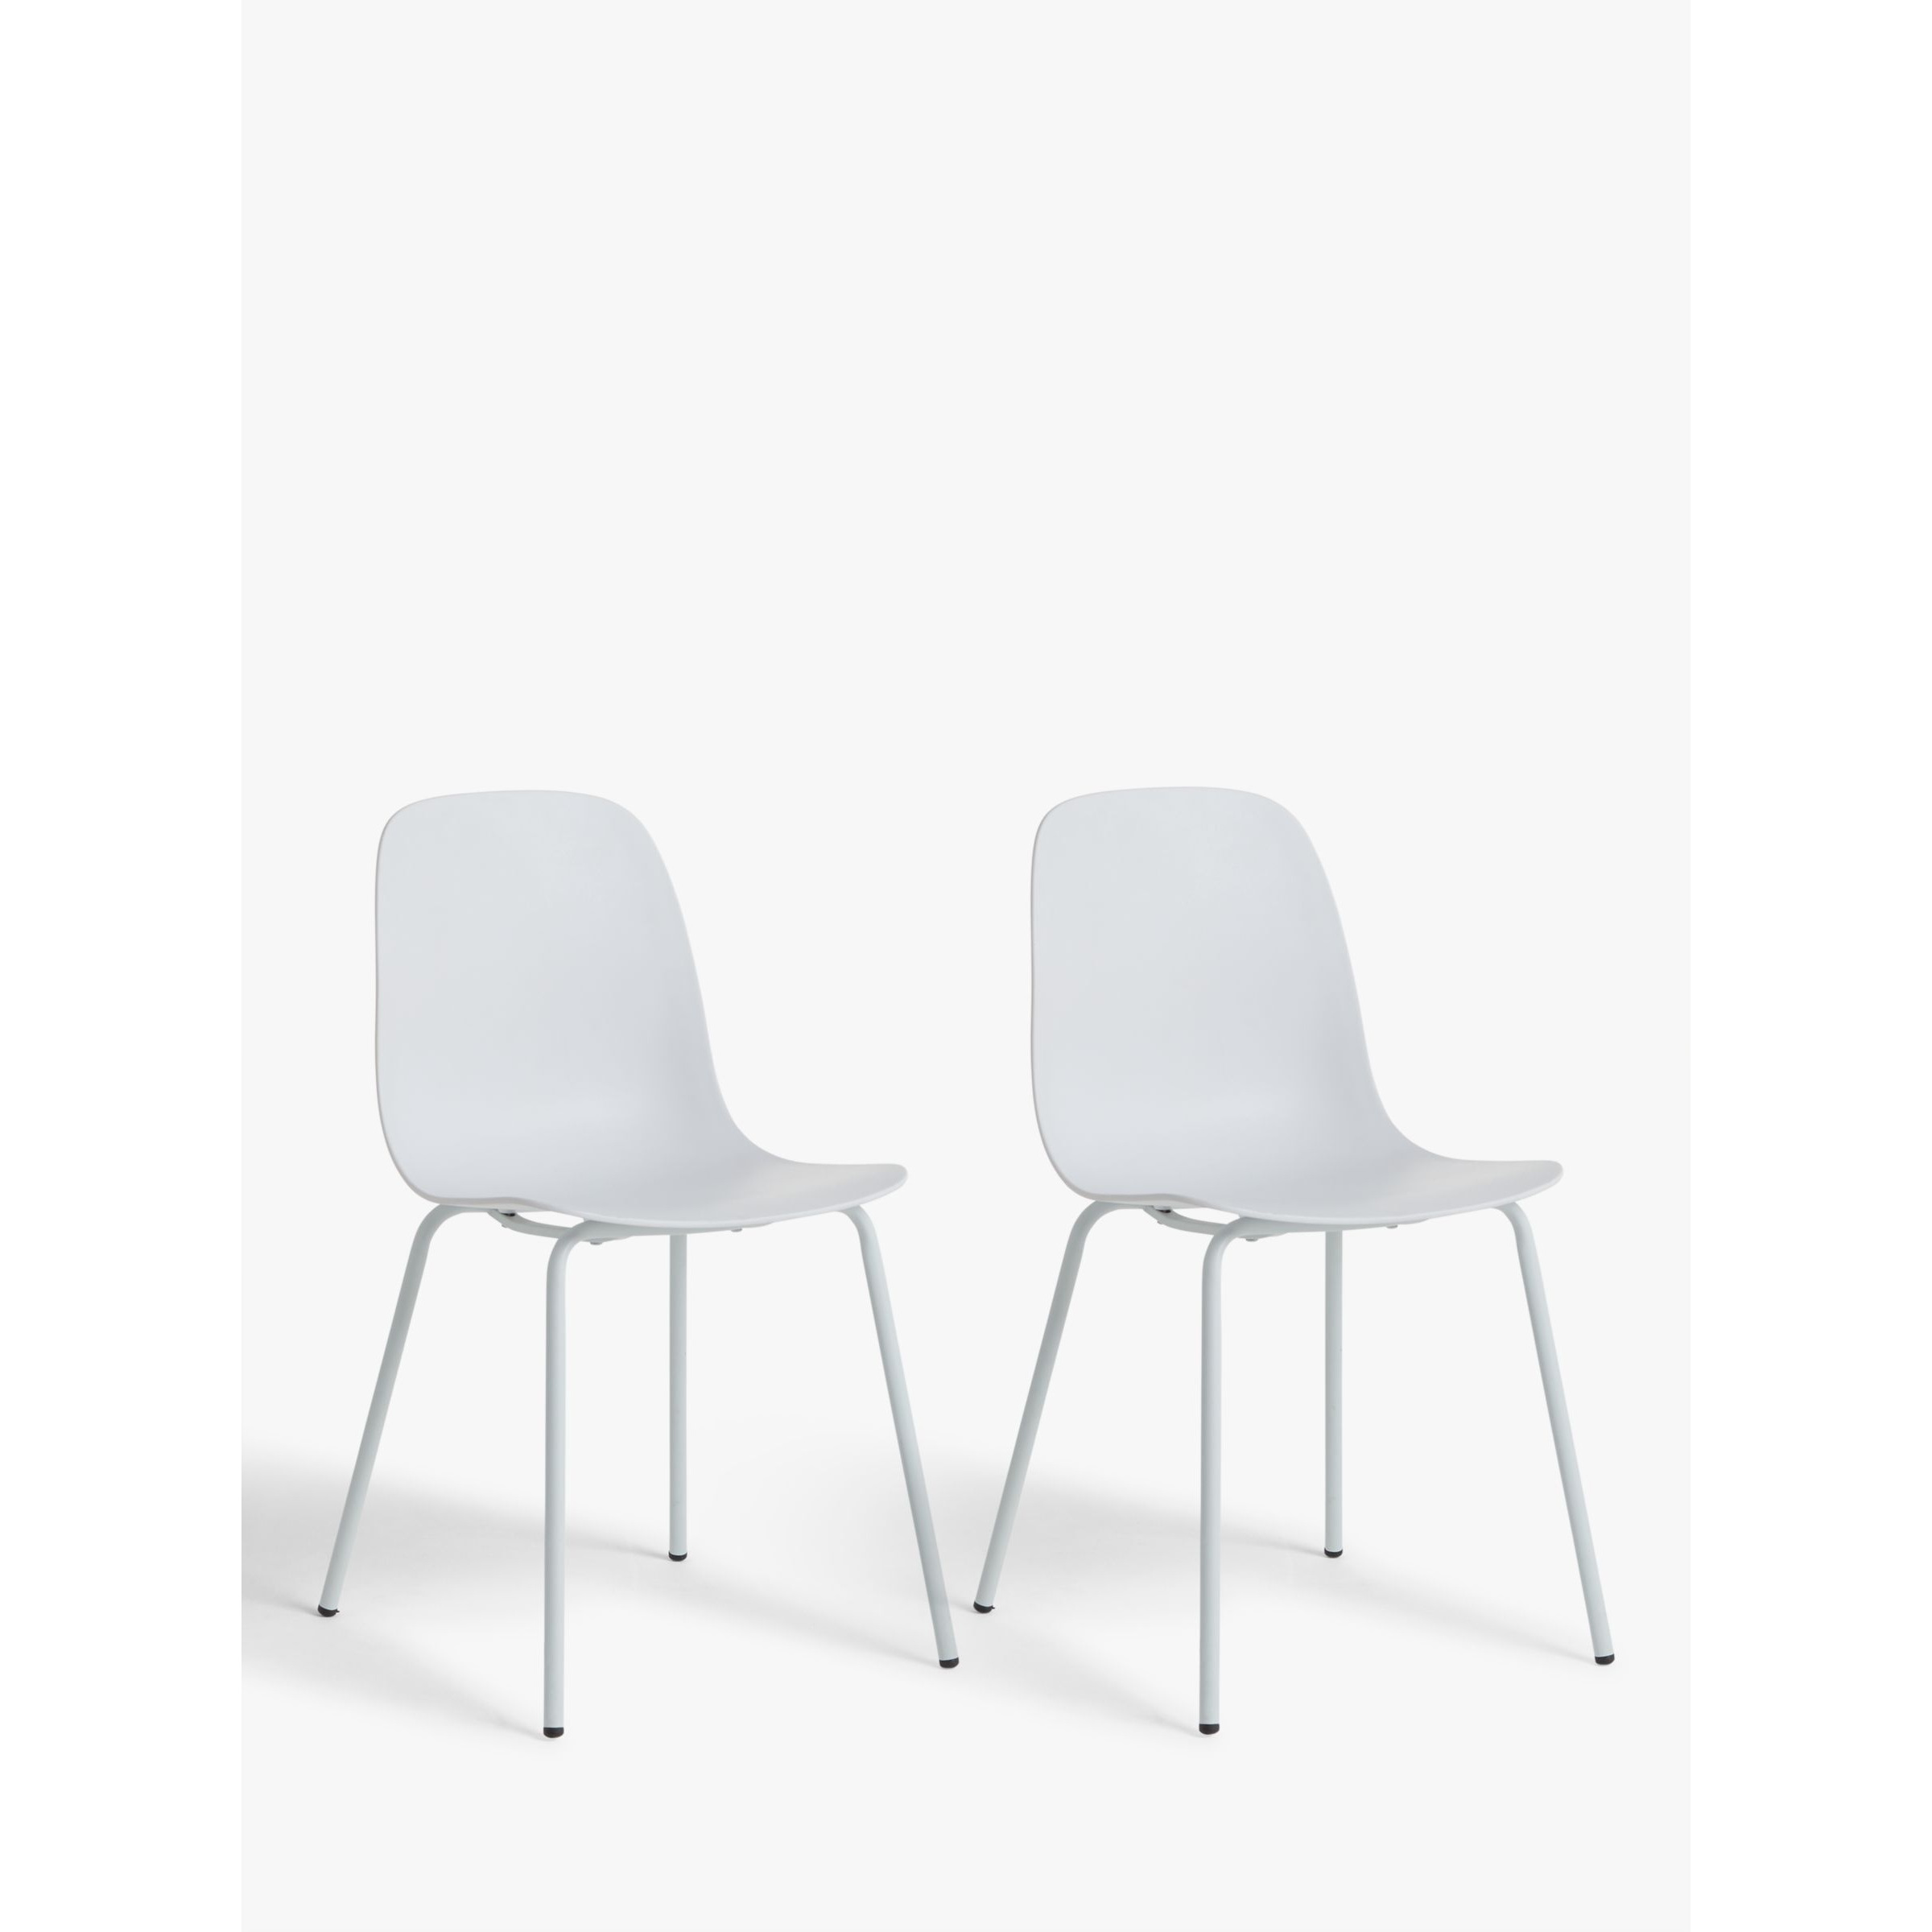 John Lewis ANYDAY Whitby Dining Chairs, Set of 2 - image 1